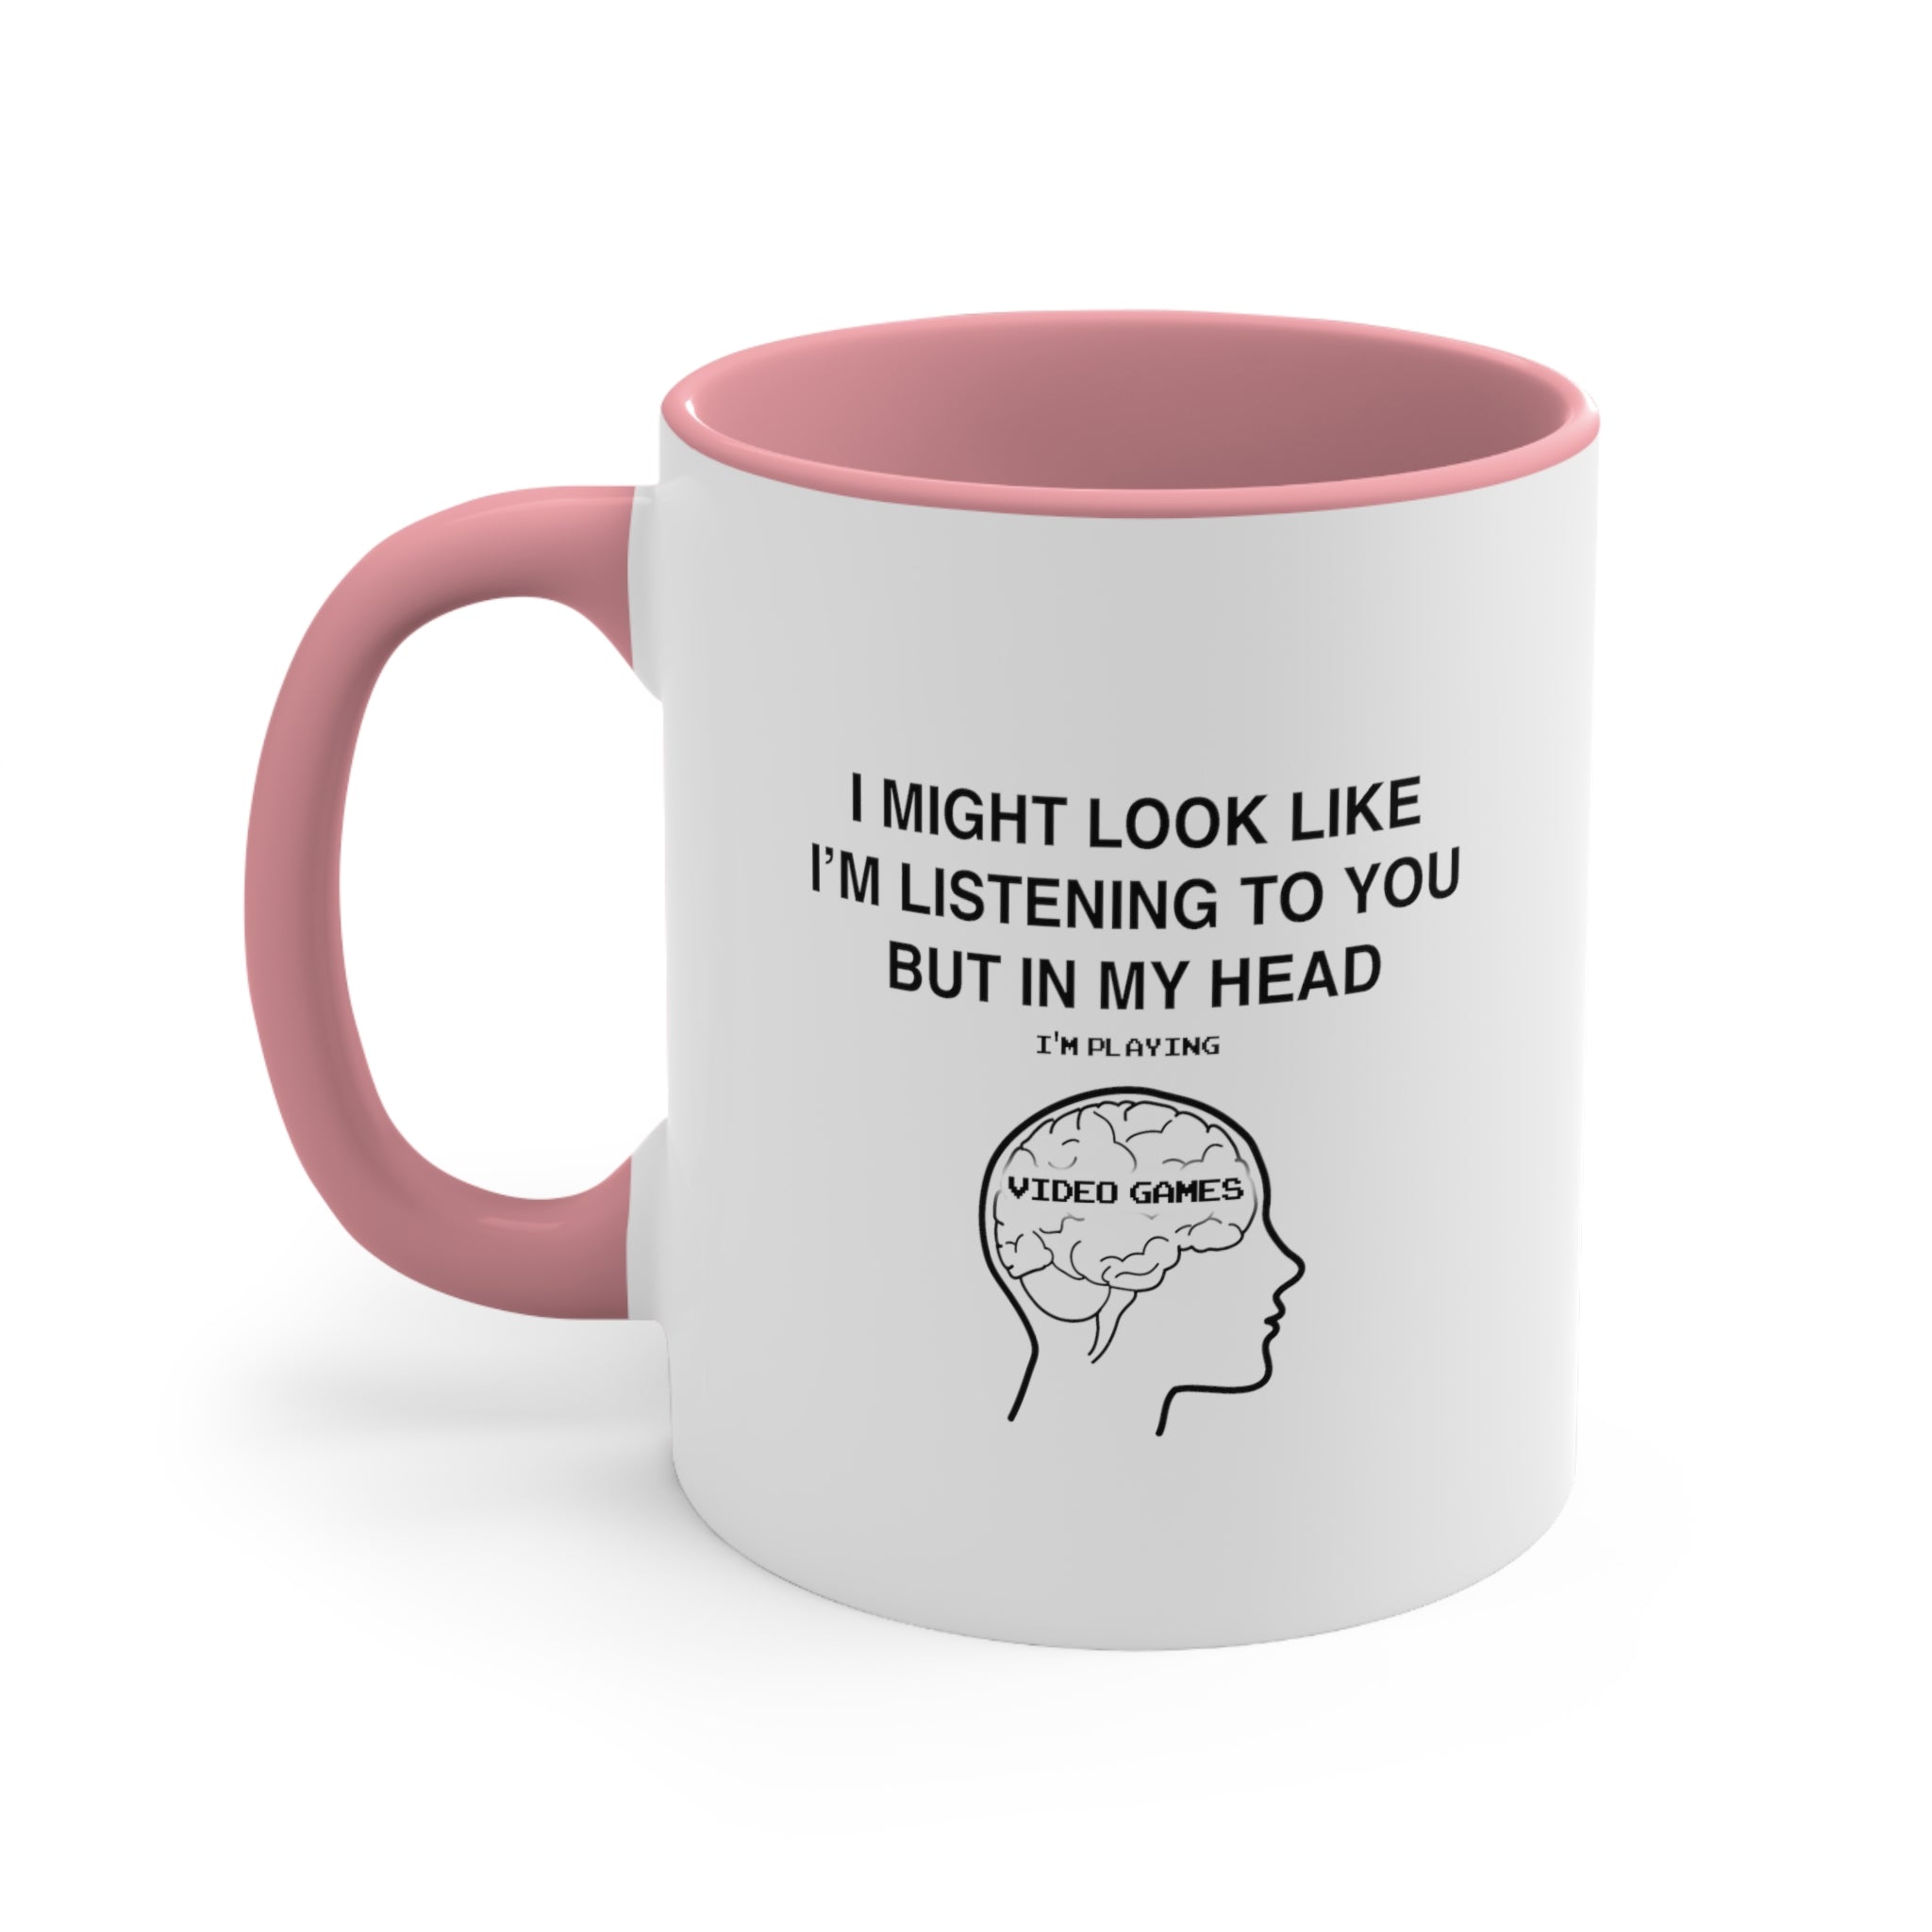 Video Games Funny Mug Coffee Mug, 11oz I Might Look Like I'm Listening To You But In My Head I'm Playing Video Games